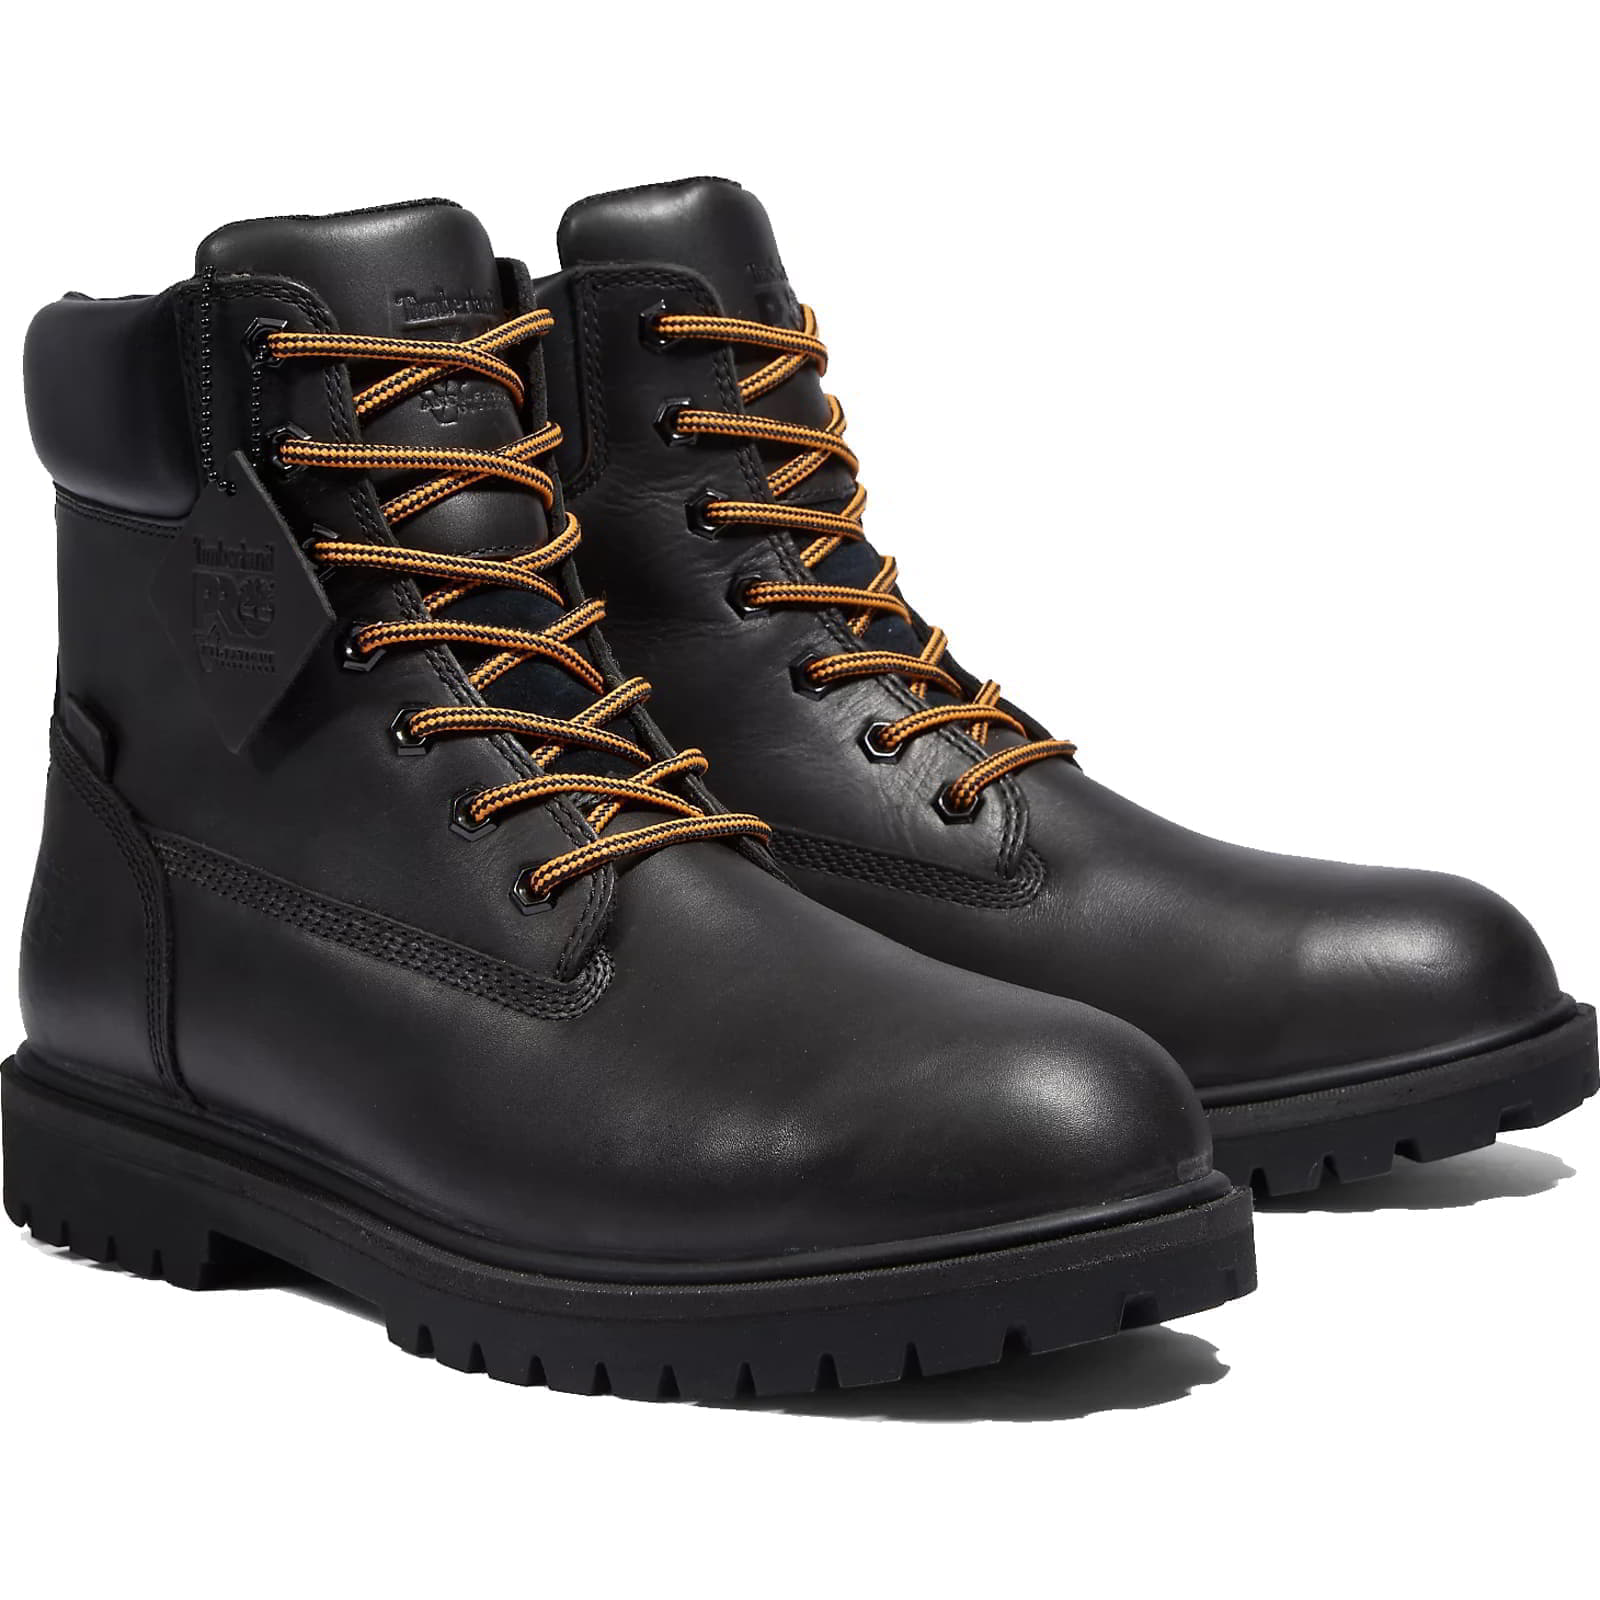 Timberland Pro Mens Iconic Waterproof Safety Toe Cap Work Ankle Boots - UK 10